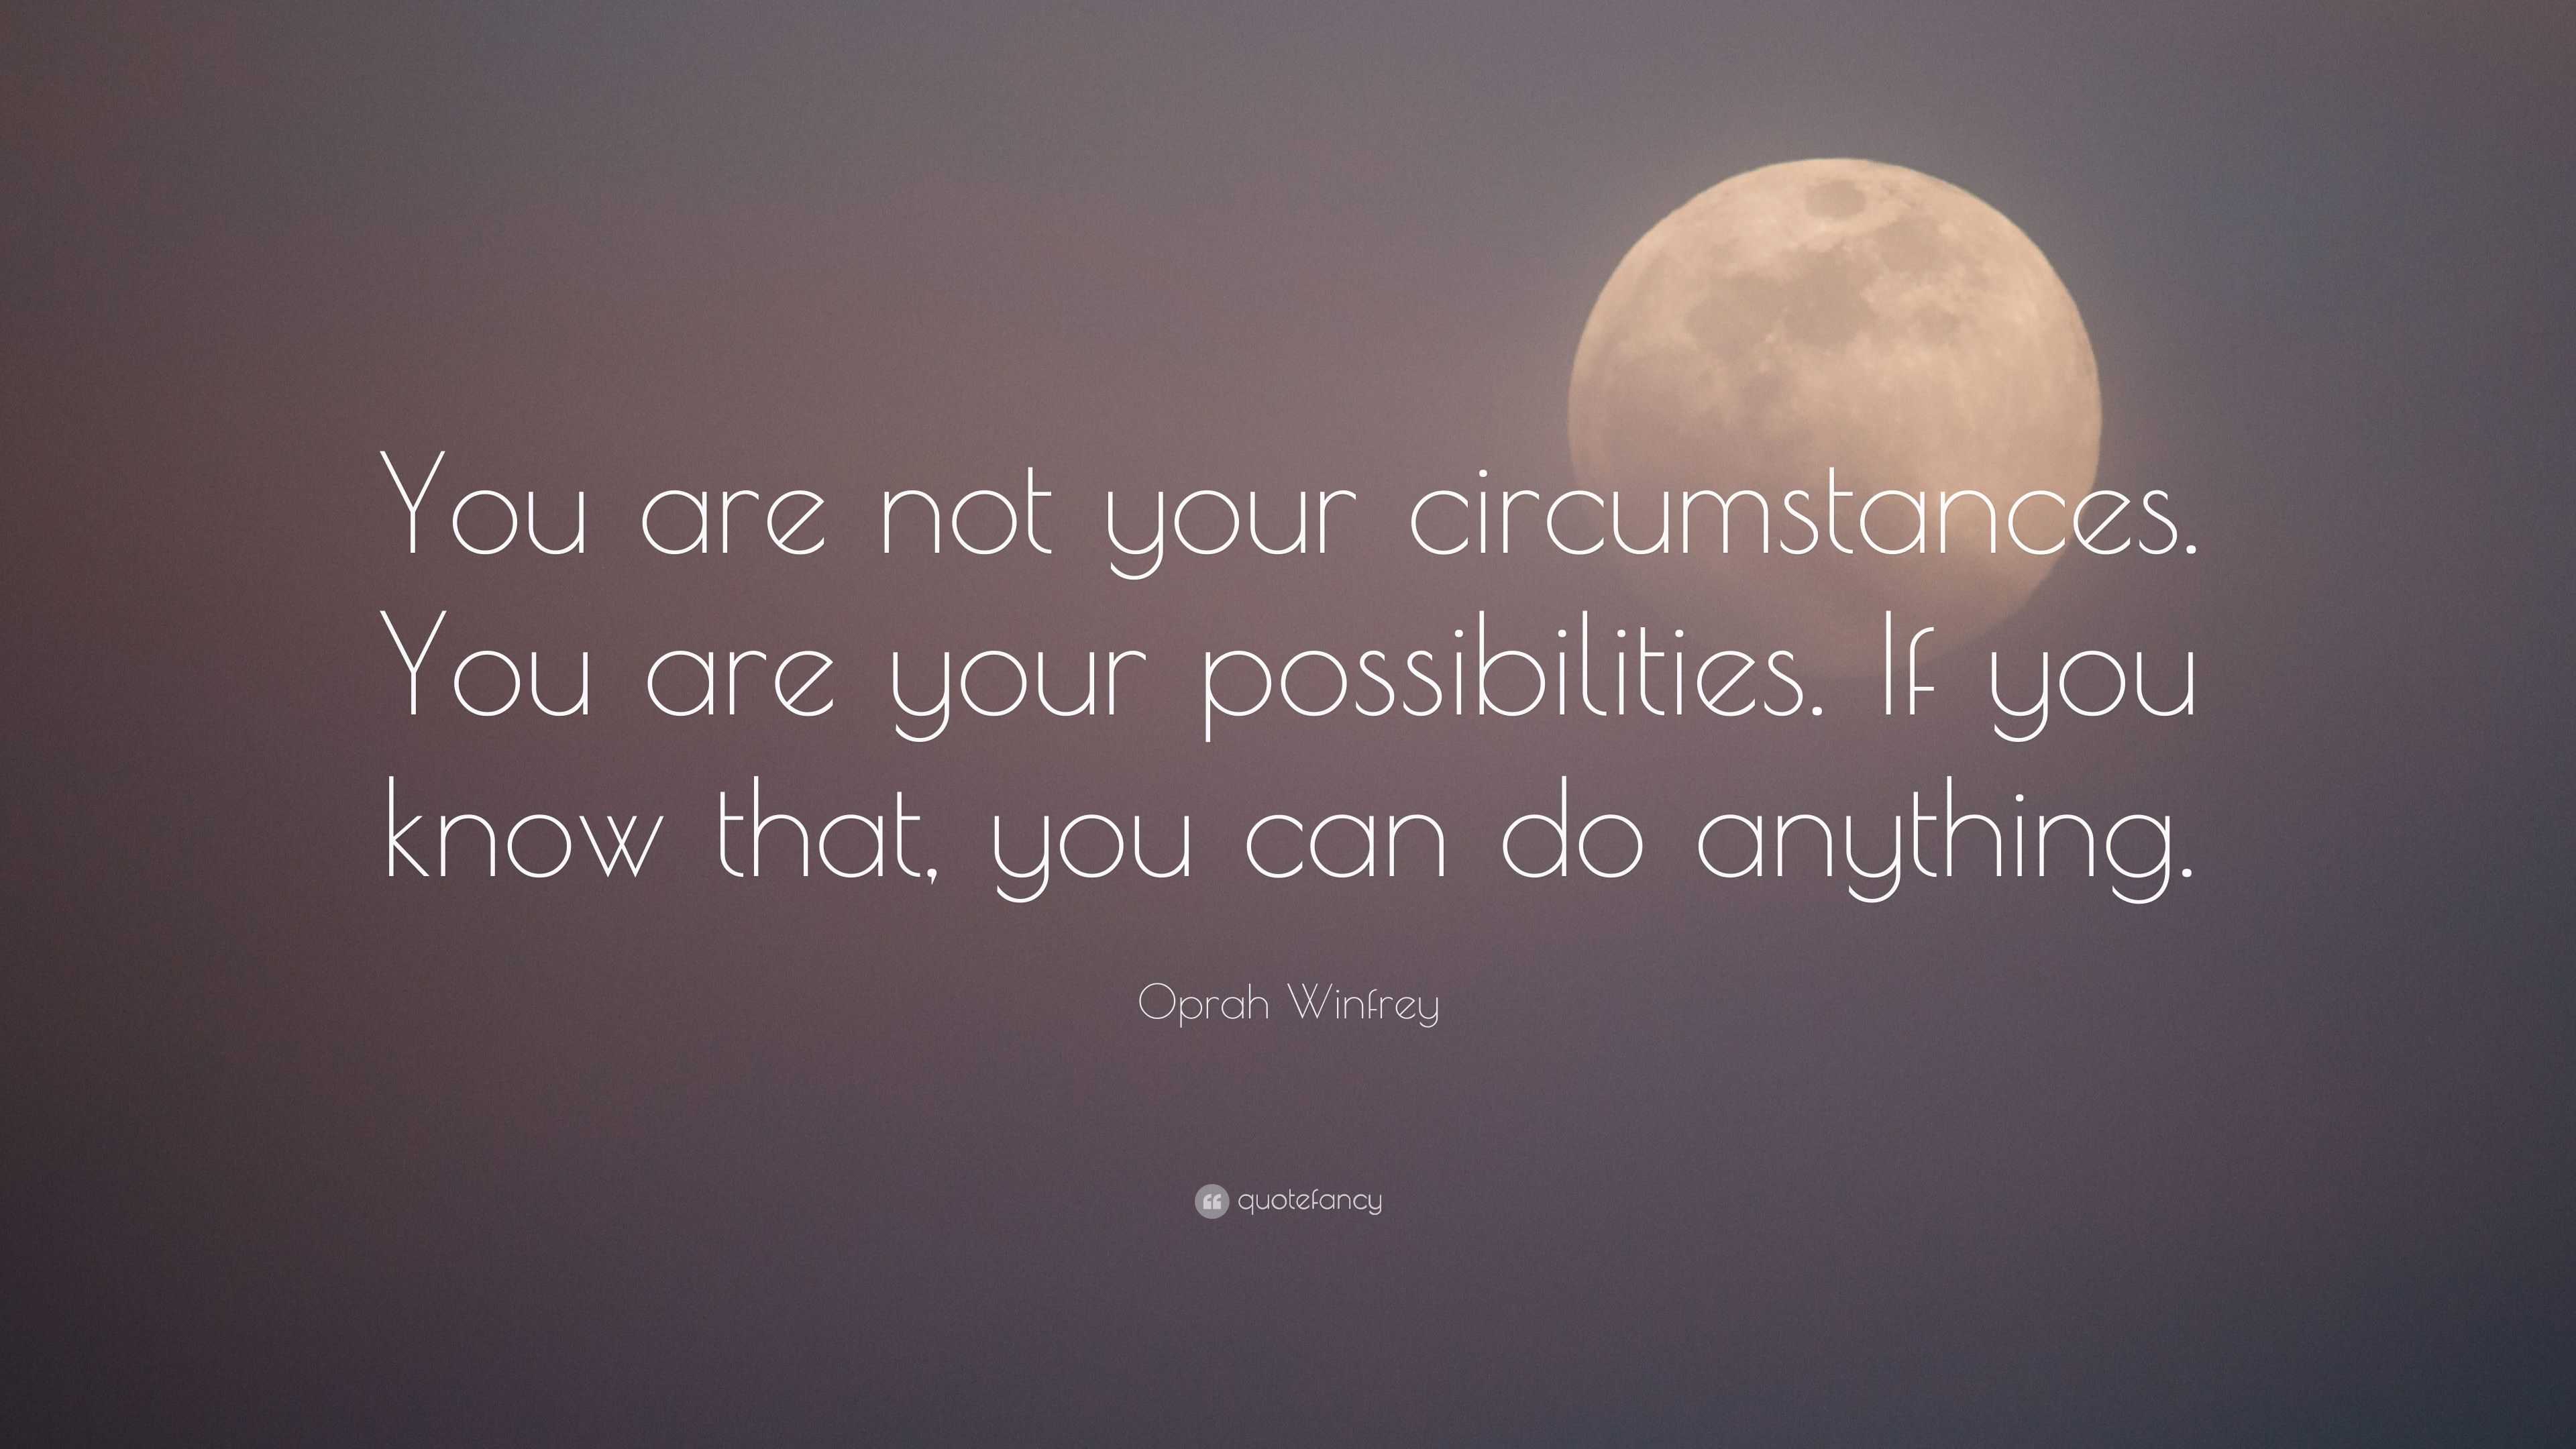 Oprah Winfrey Quote: “You are not your circumstances. You are your ...